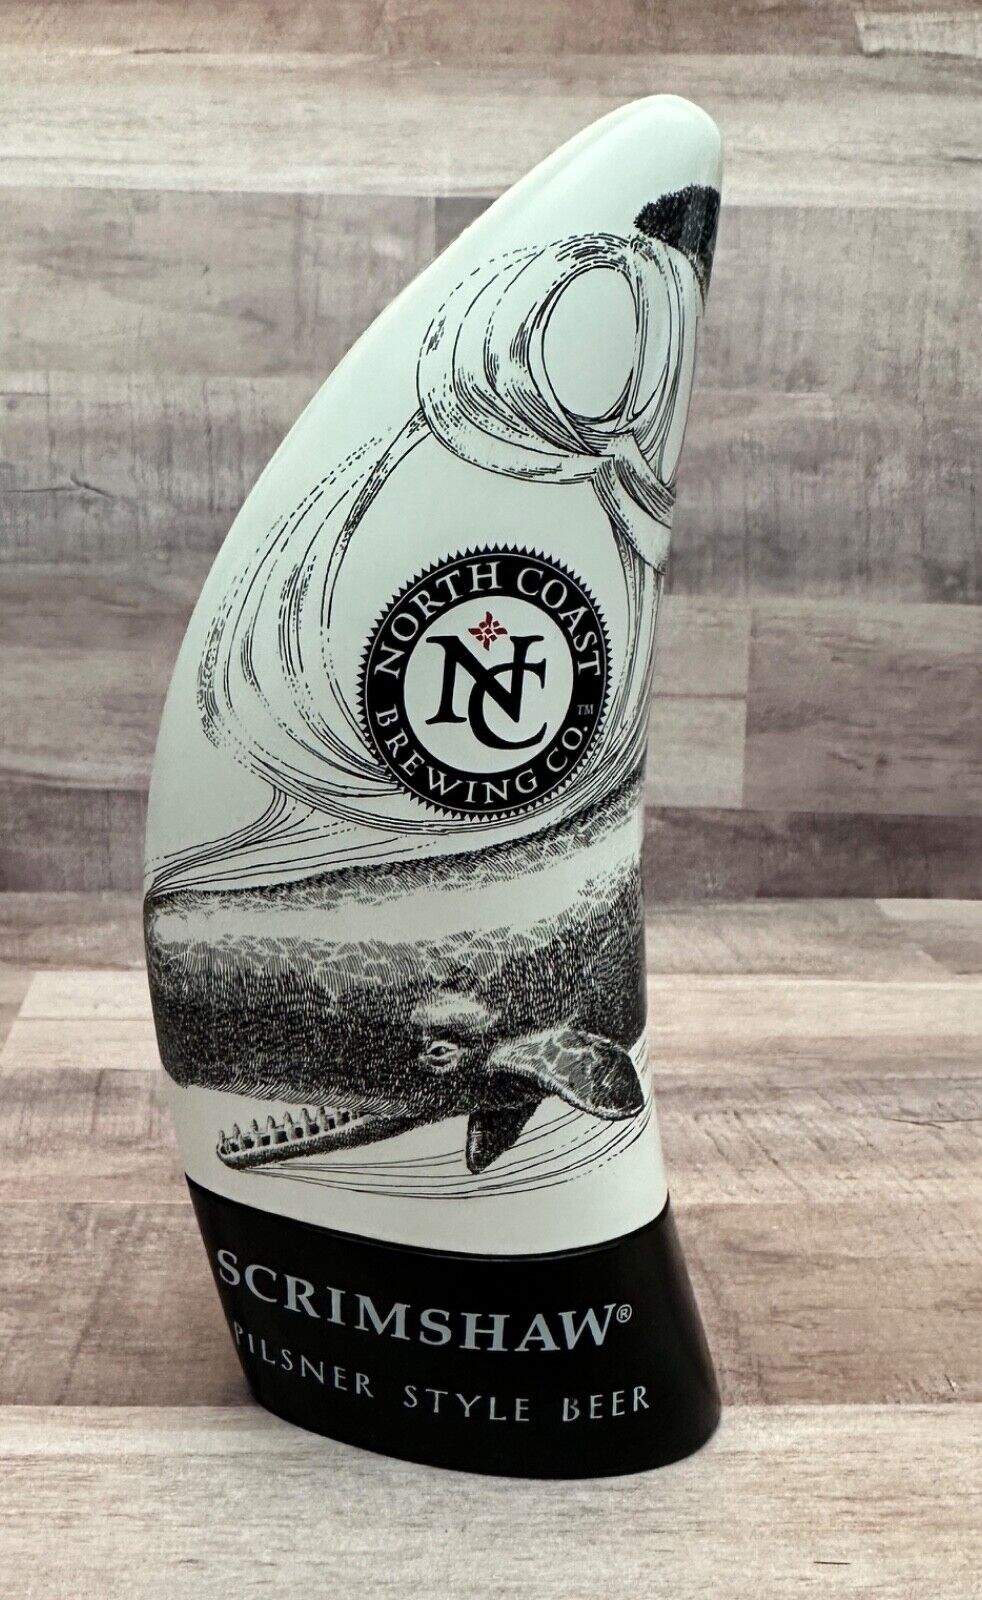 North Coast Brewing Scrimshaw Pilsner Style Beer Tap Handle whale tooth